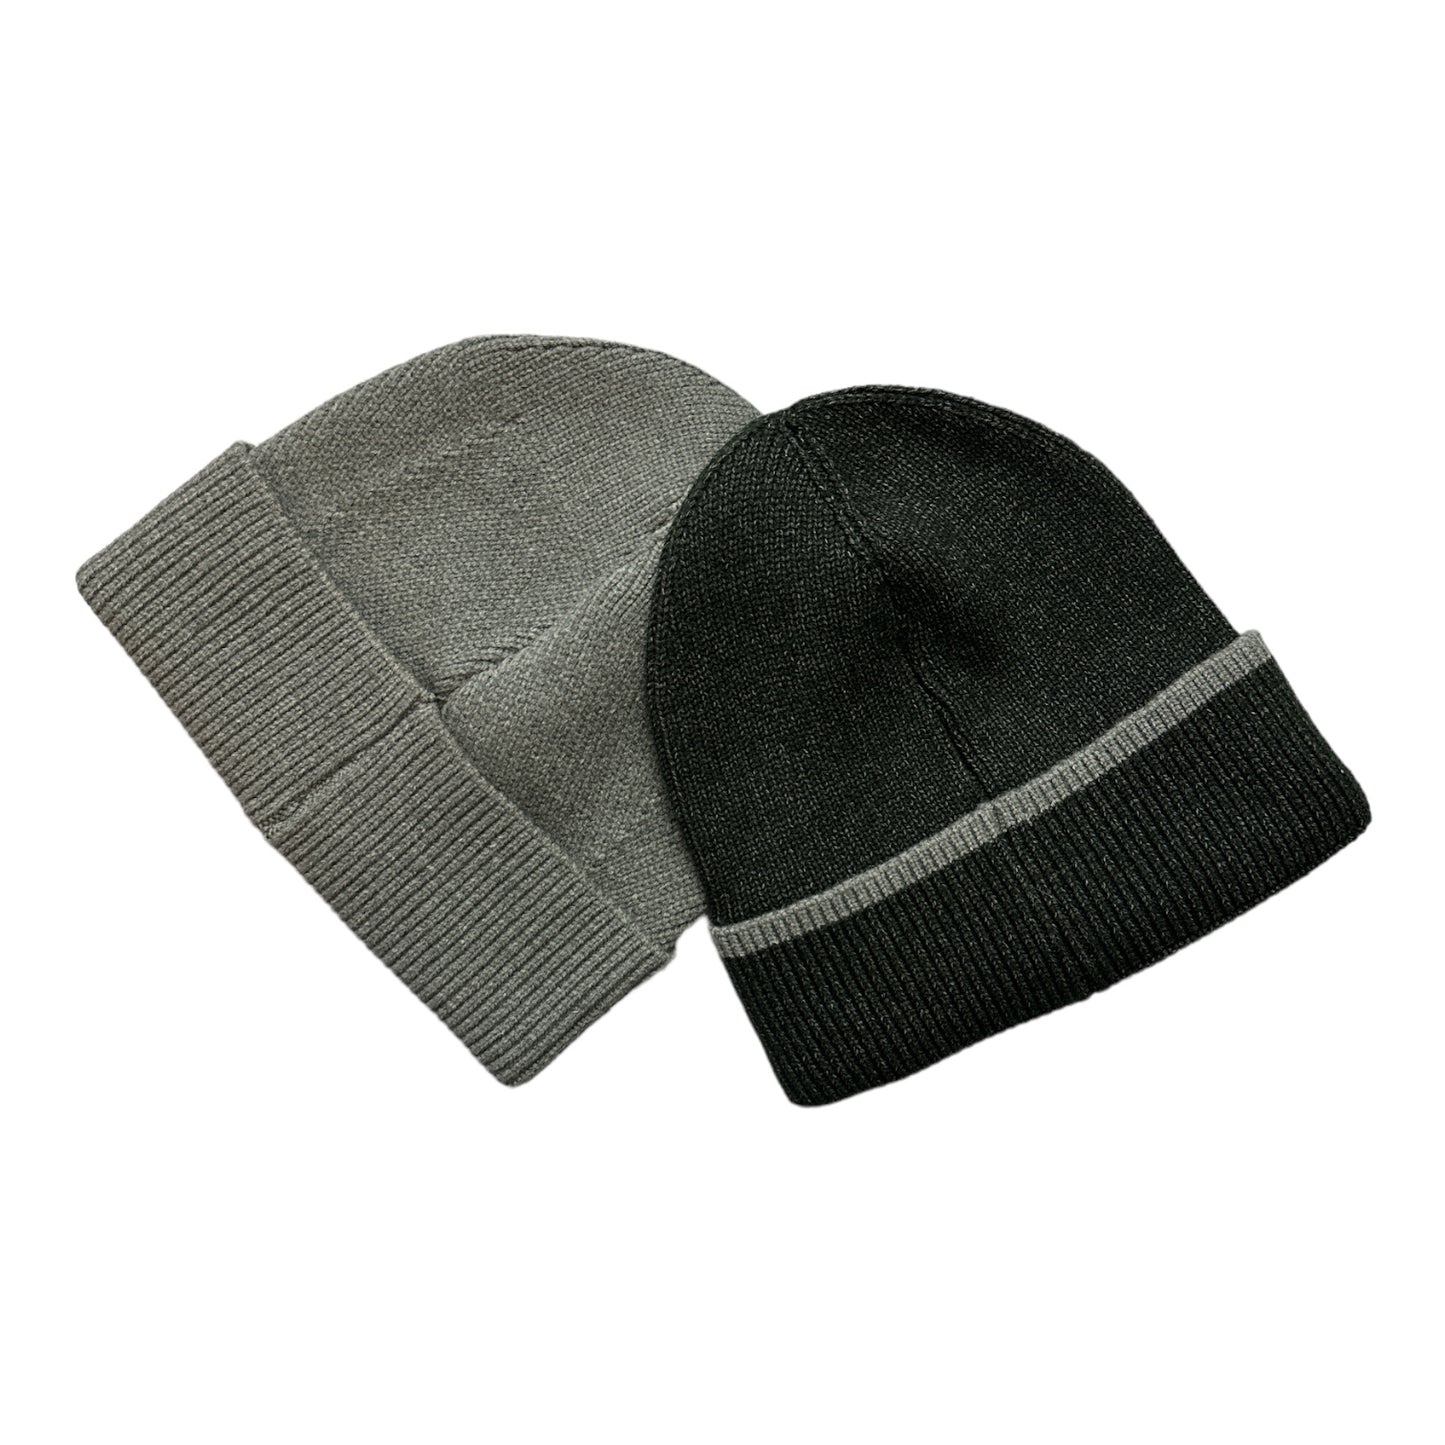 Free Country Men's One Size Fits Most 2-Pack Knit Stretch  Beanies